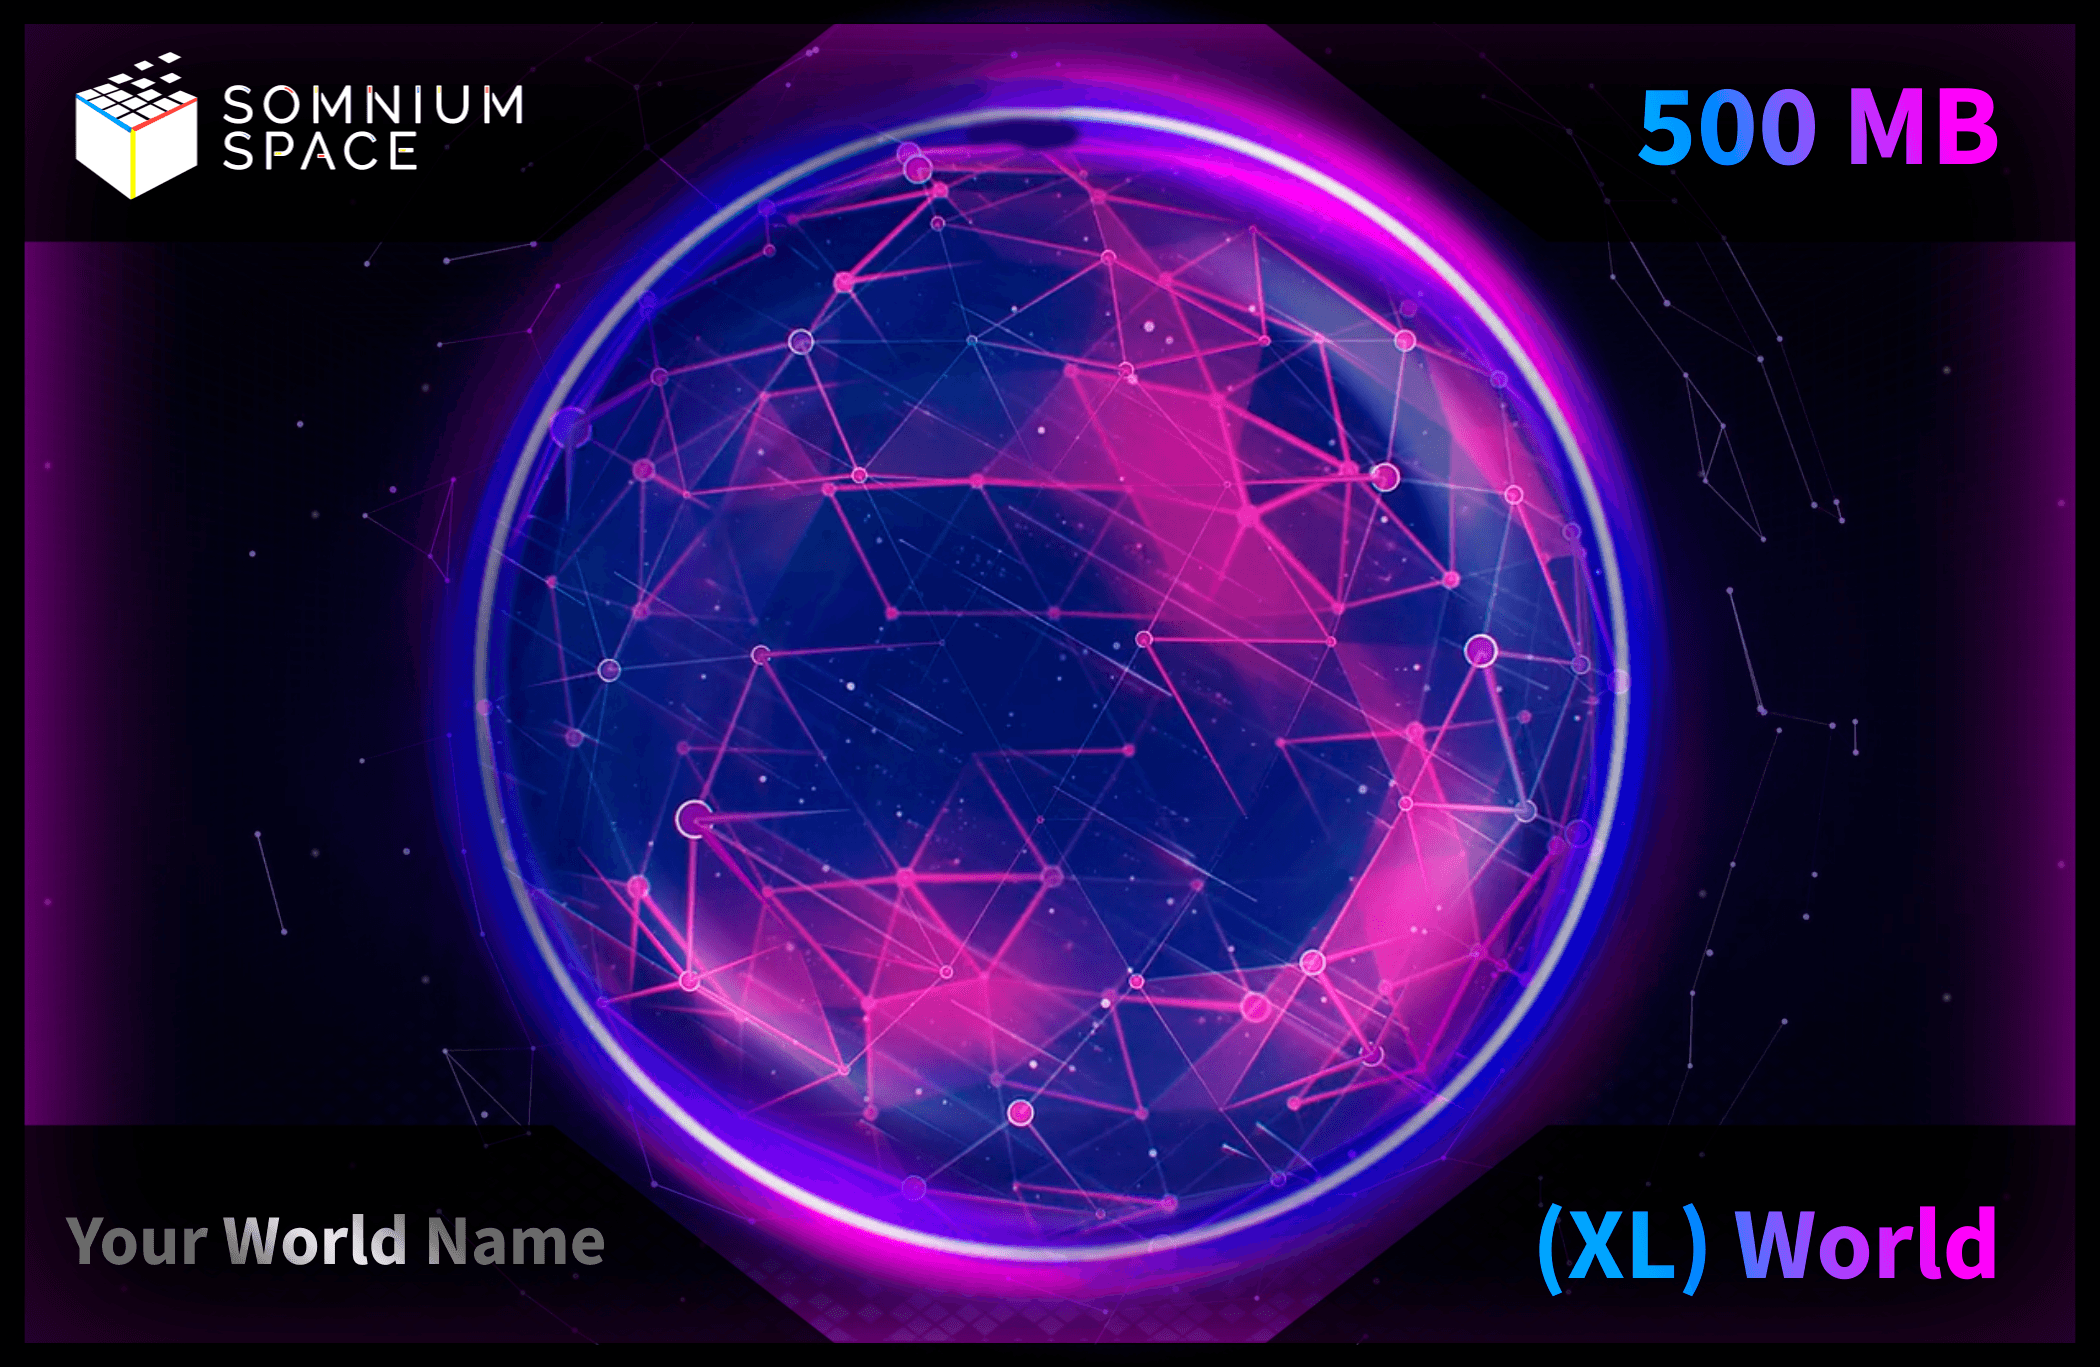 Extra Large (XL) WORLD in Somnium Space